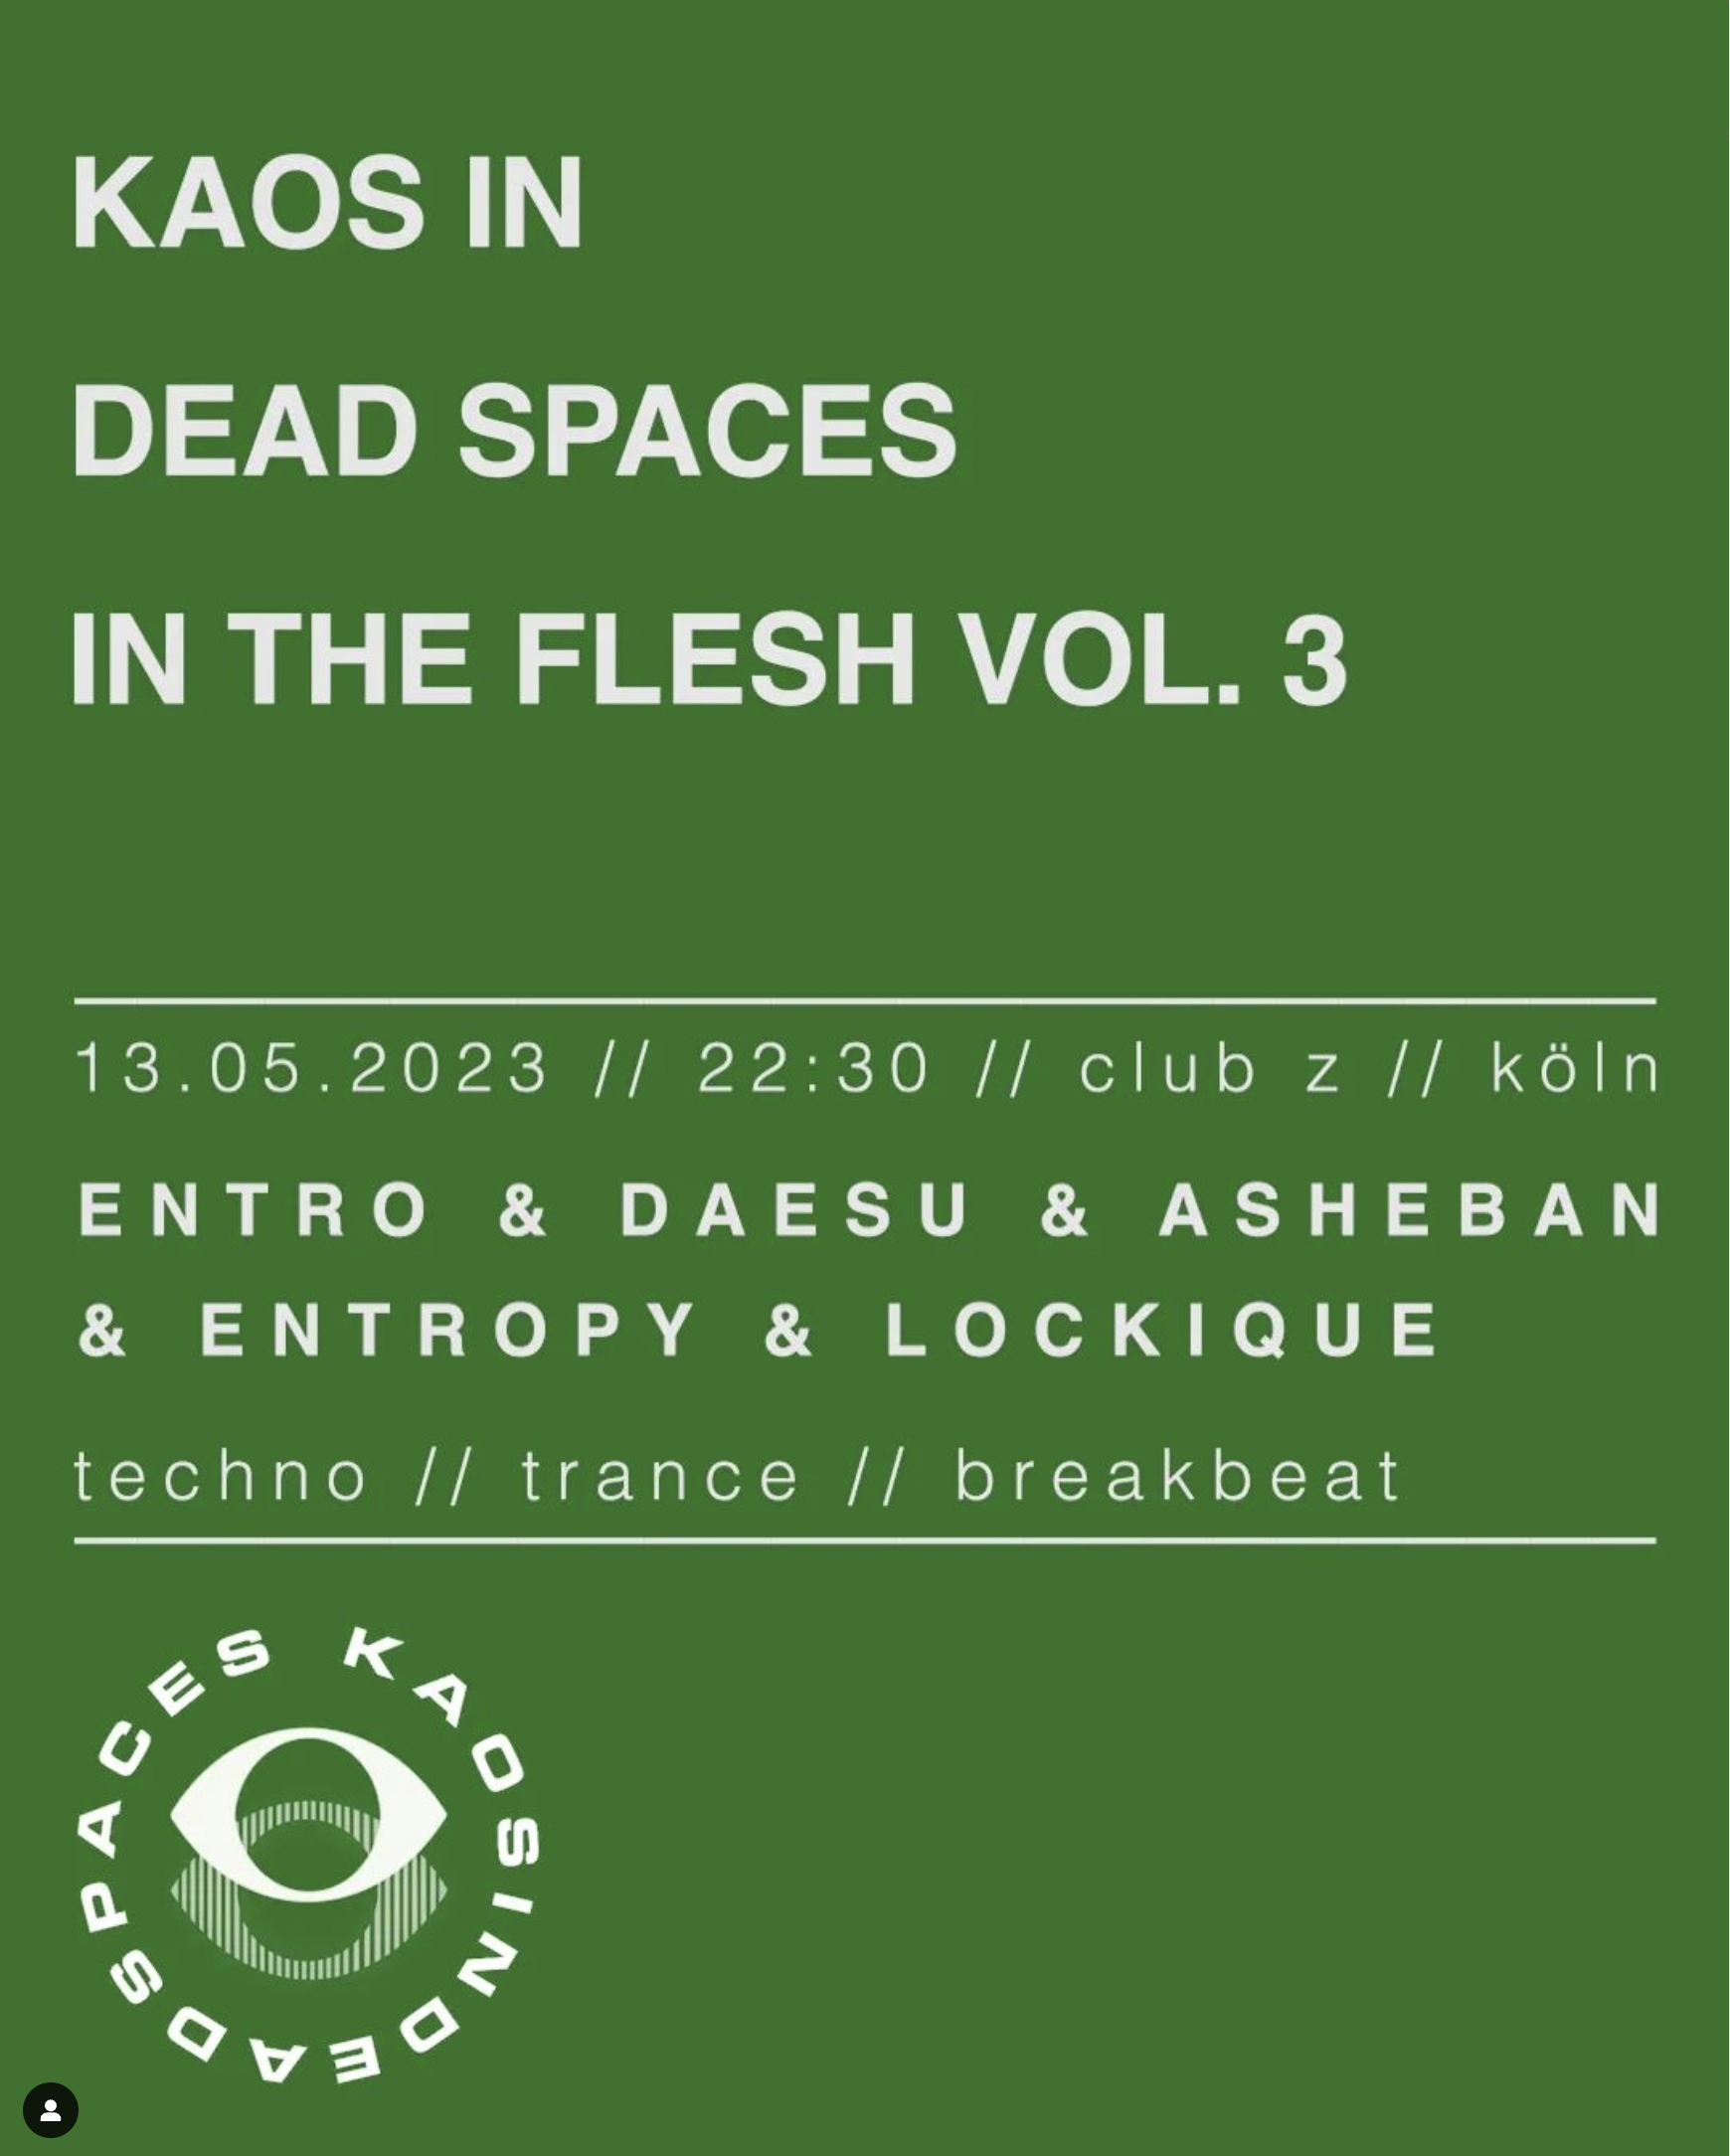 KAOS IN DEAD SPACES IN THE FLESH VOL. 3